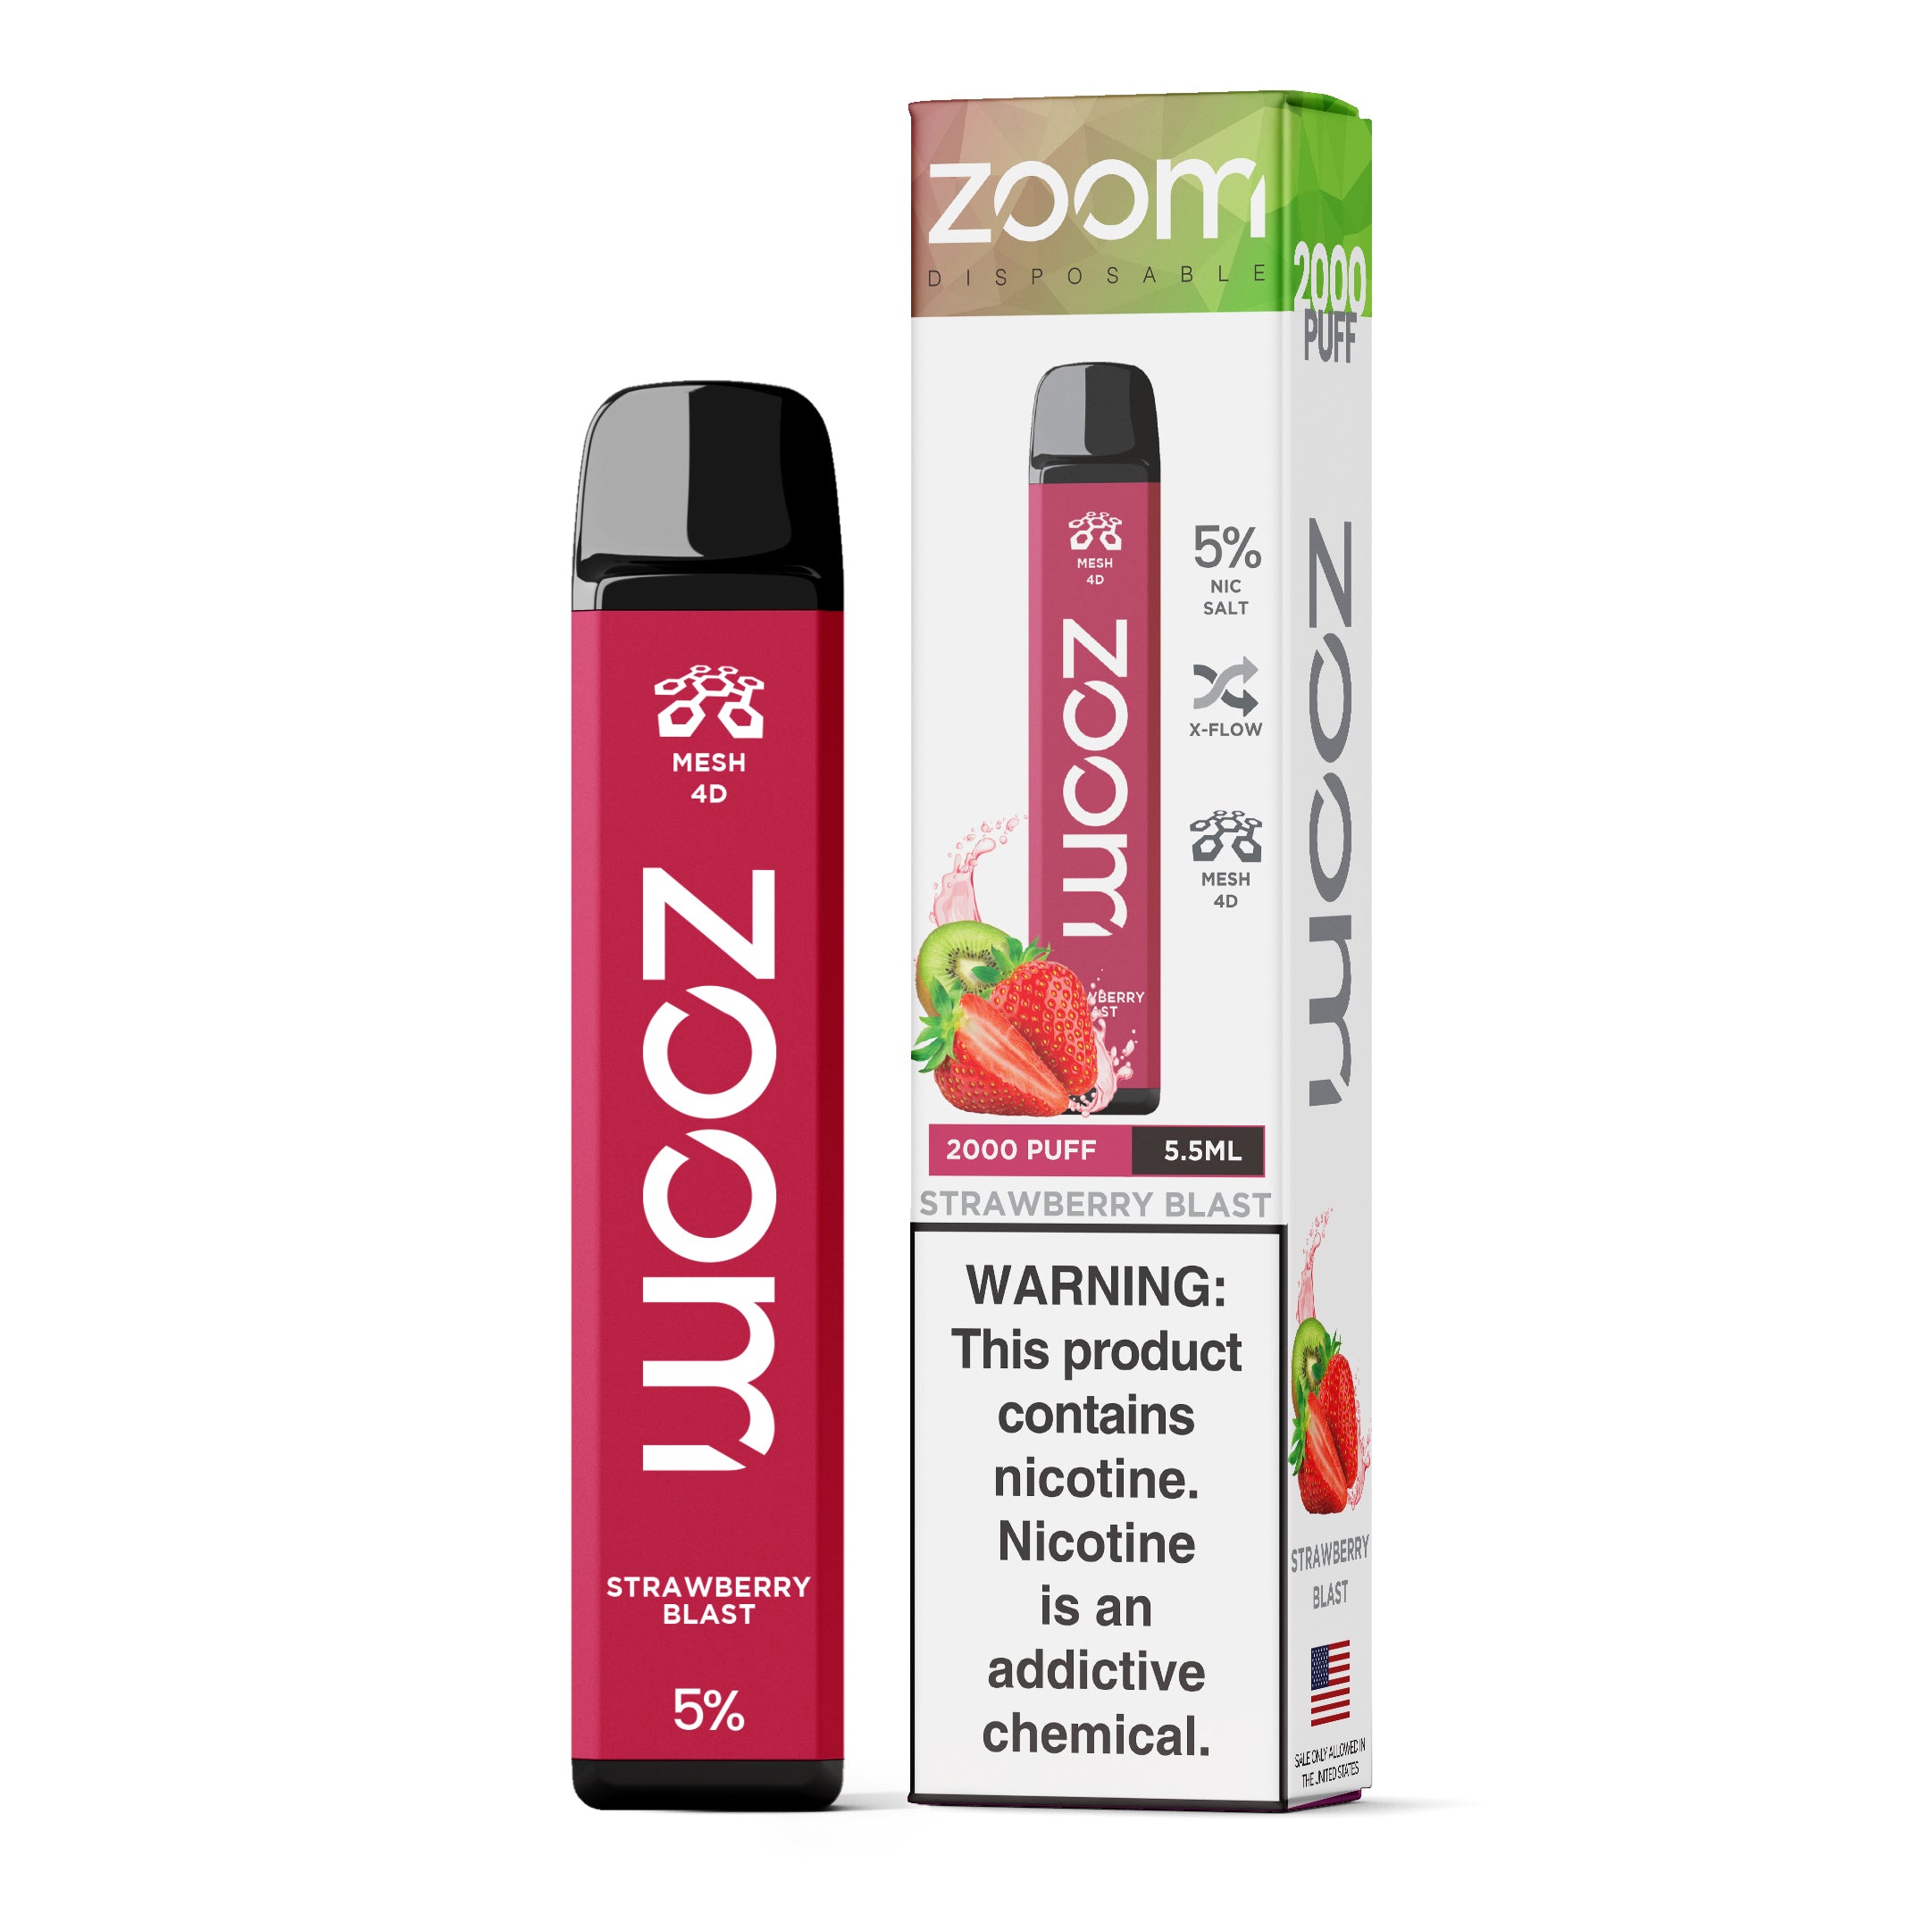  Zoom Disposable | 2000 Puffs | 5.5mL Strawberry Blast with packaging